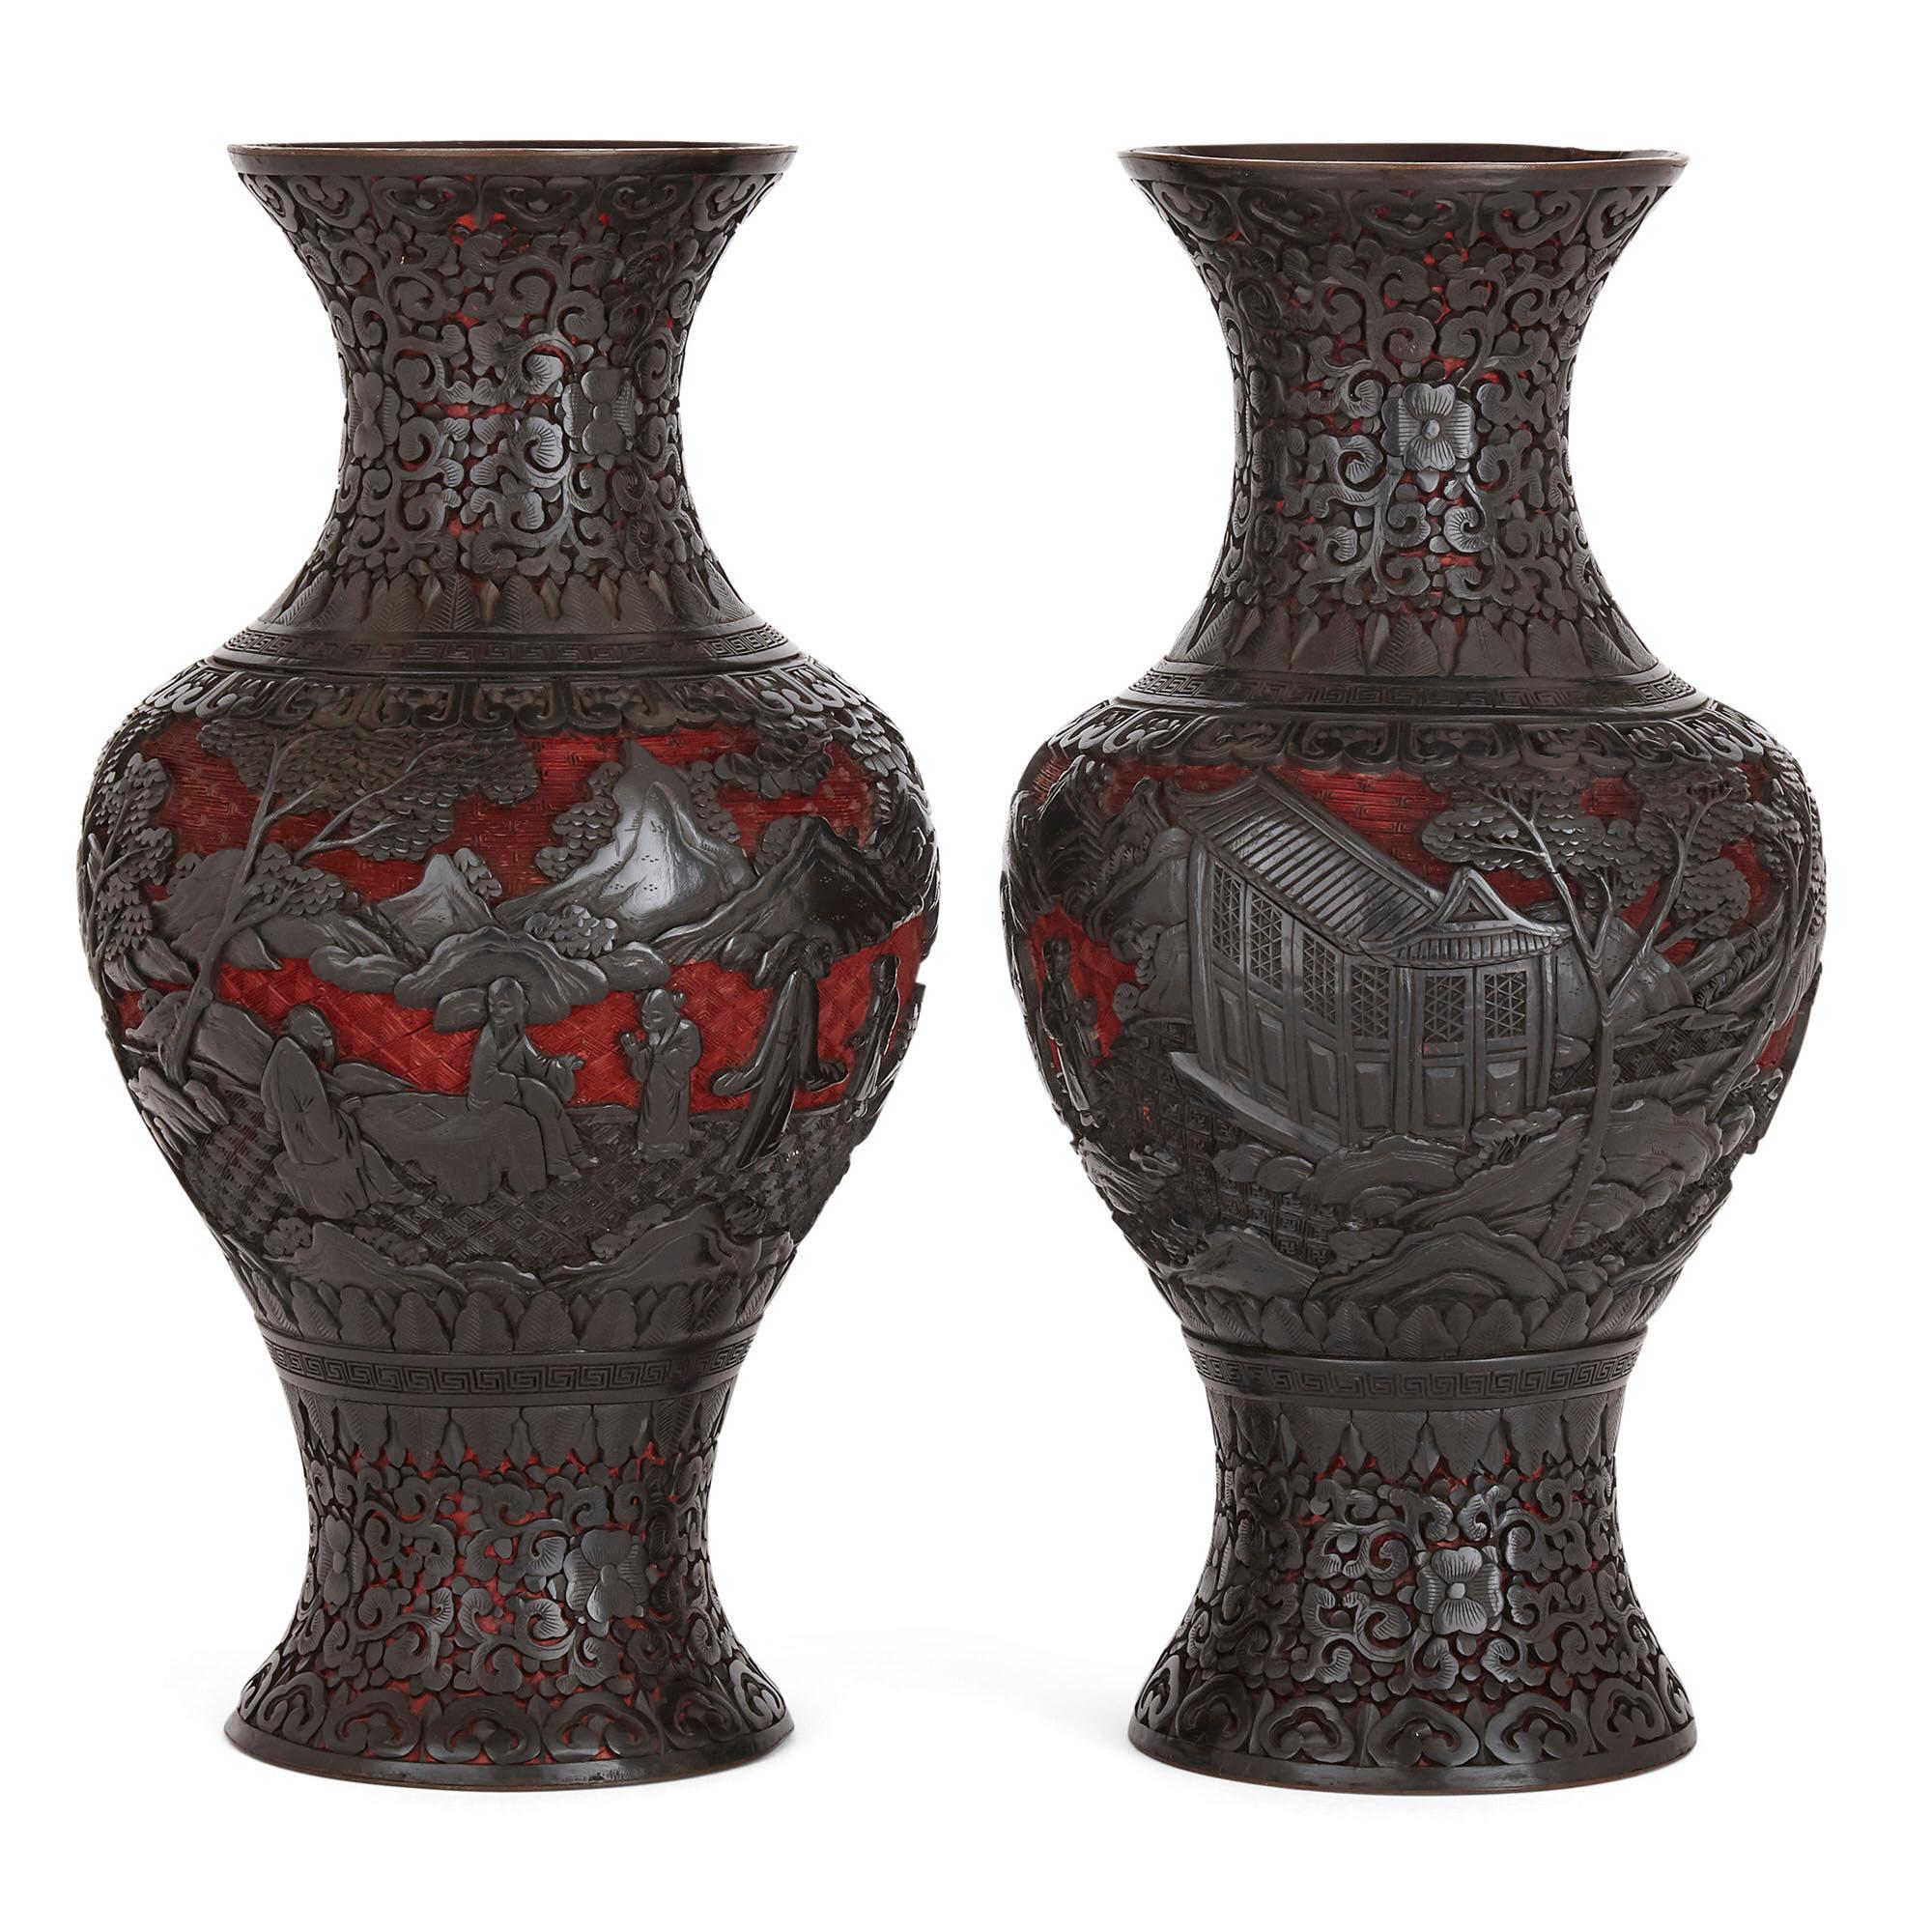 Each vase in this pair is baluster shaped and profusely ornamented with beautifully carved and layered lacquering. The body of each vase is lacquered in the traditional manner, typical of pieces produced during the late Qing dynasty, with black